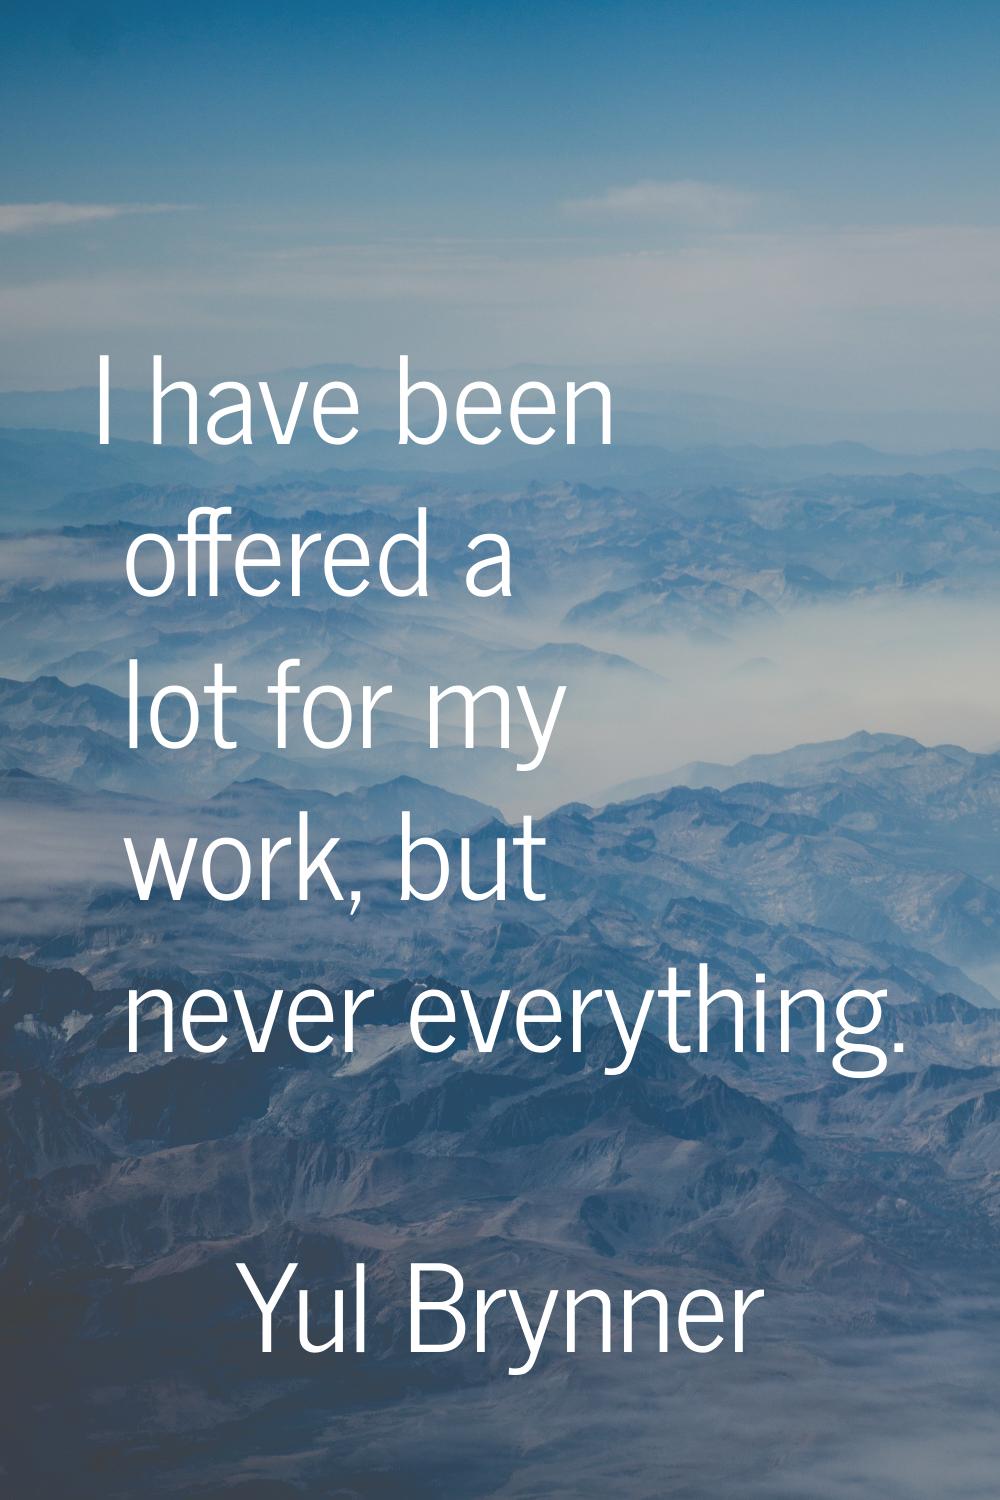 I have been offered a lot for my work, but never everything.